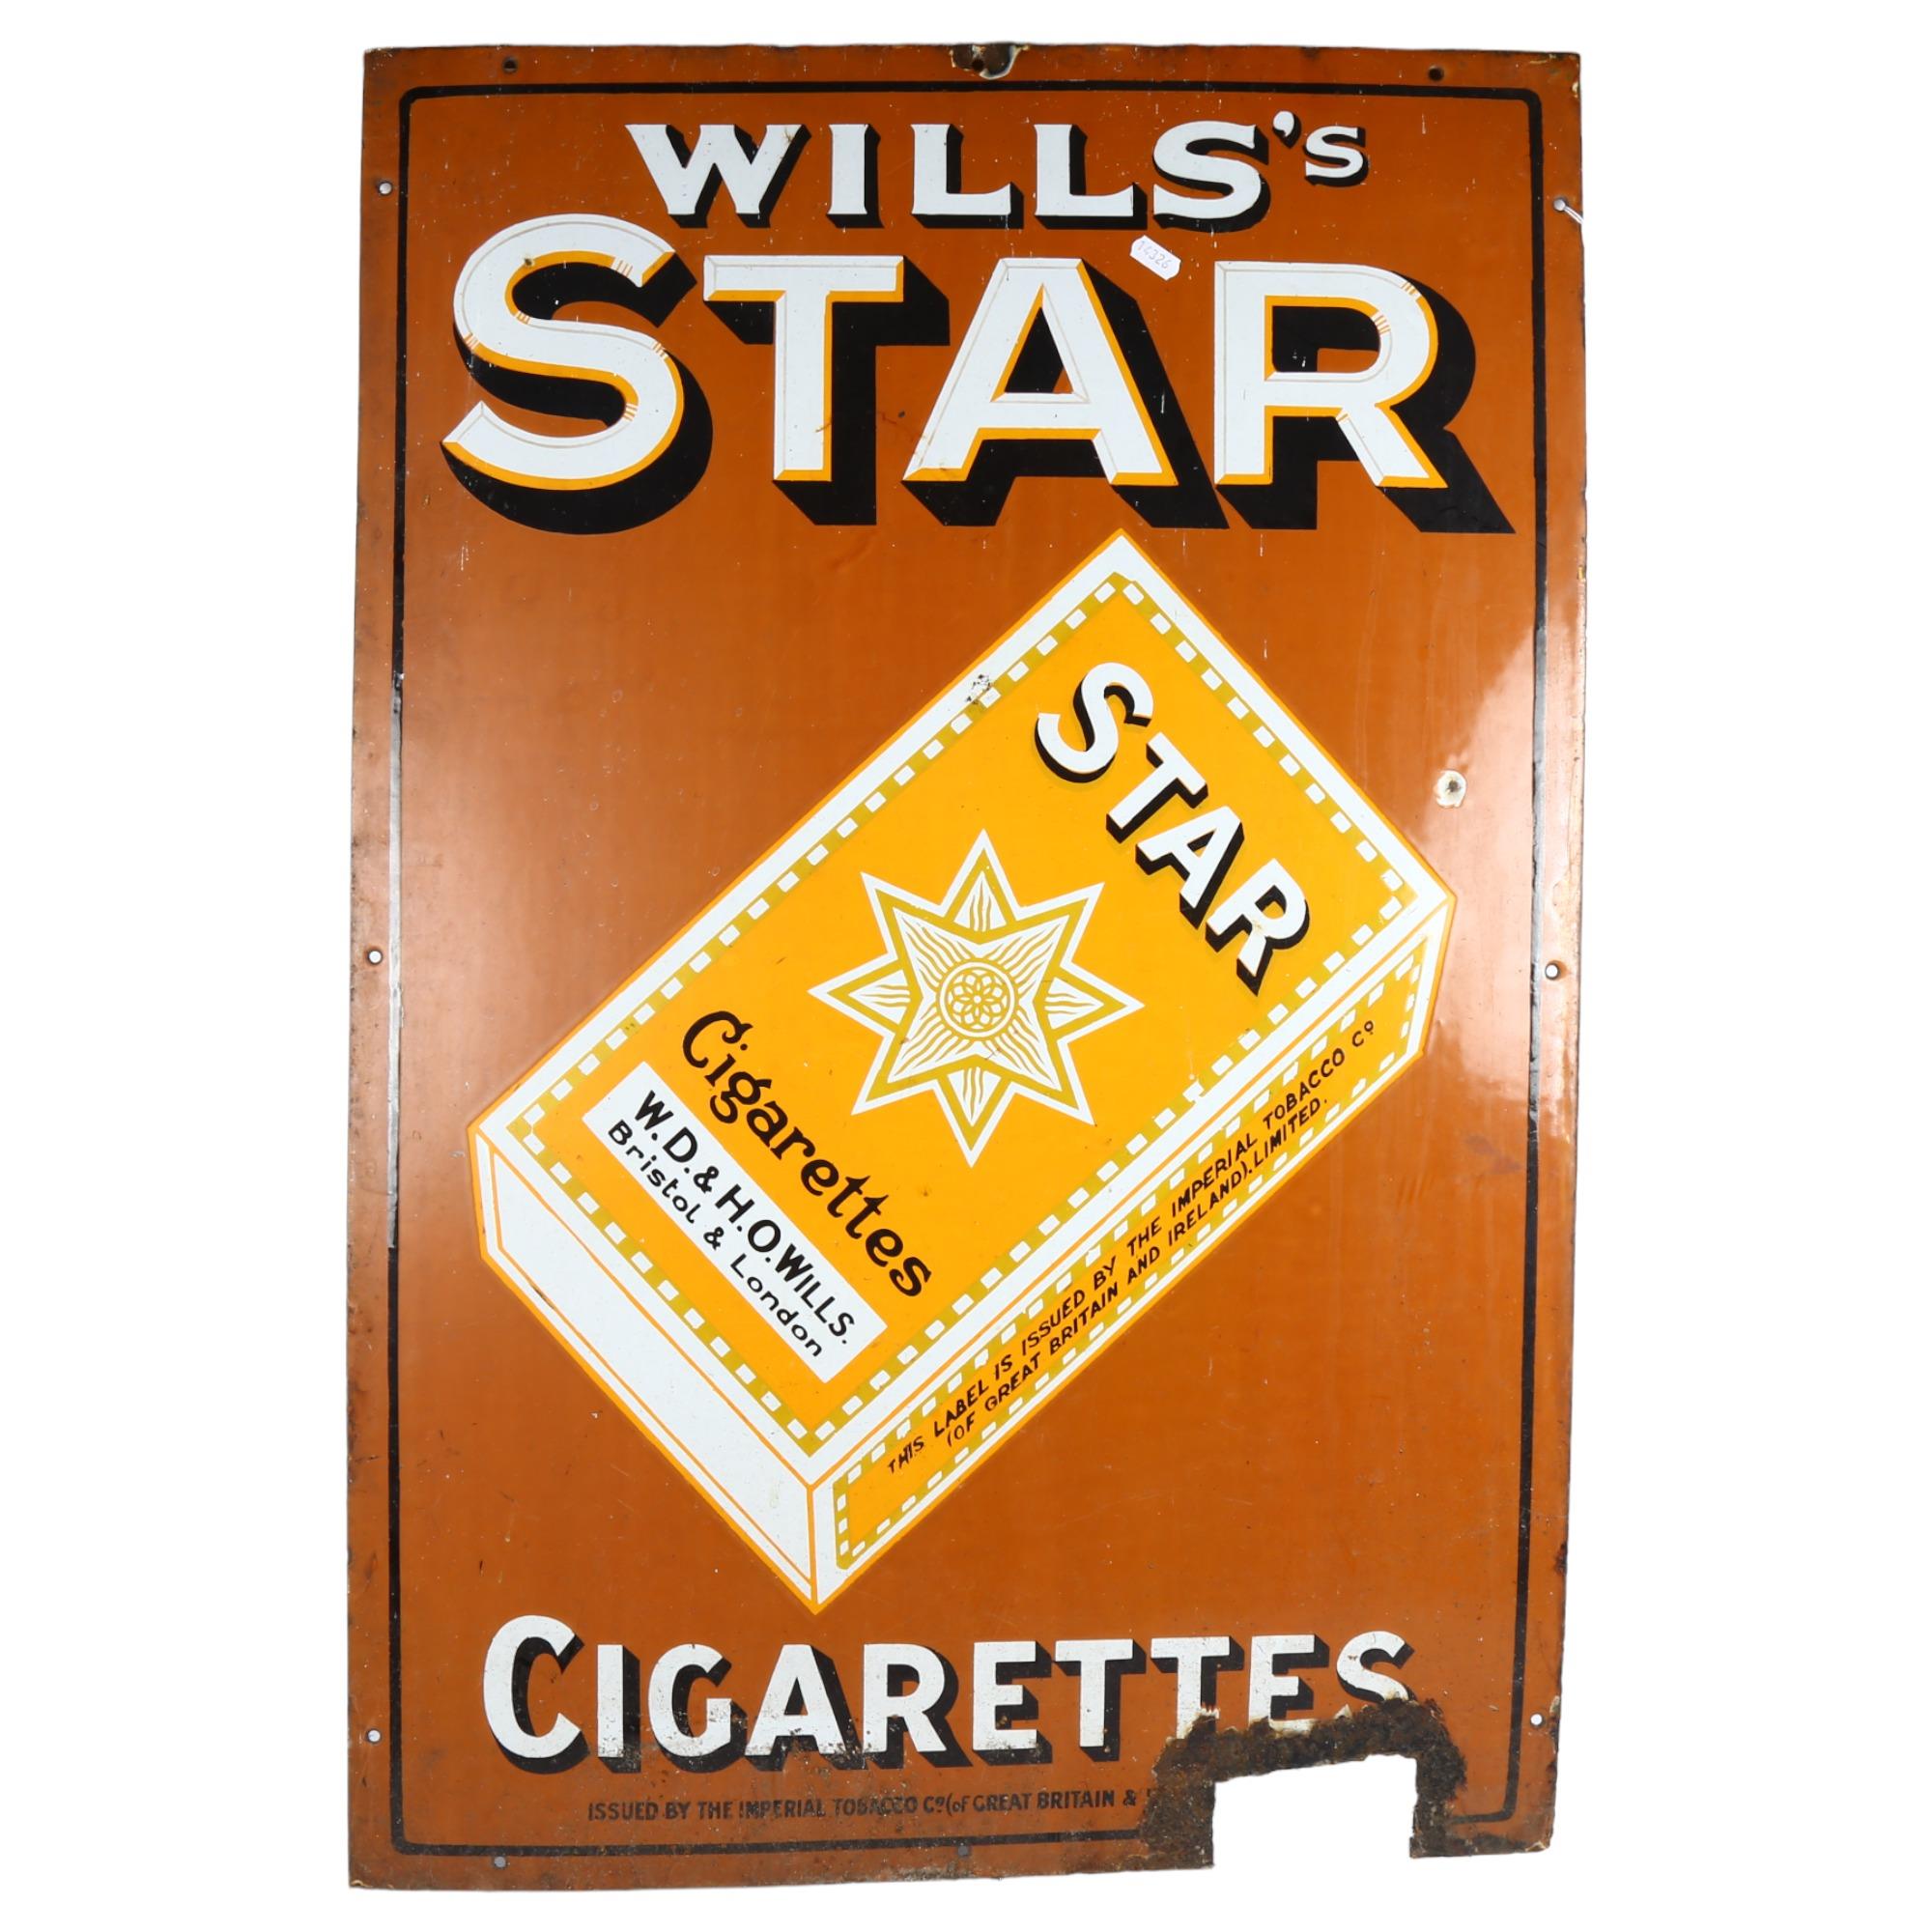 A Vintage Wills's Star enamel advertising sign for Star Cigarettes, issued by the Imperial Tobacco